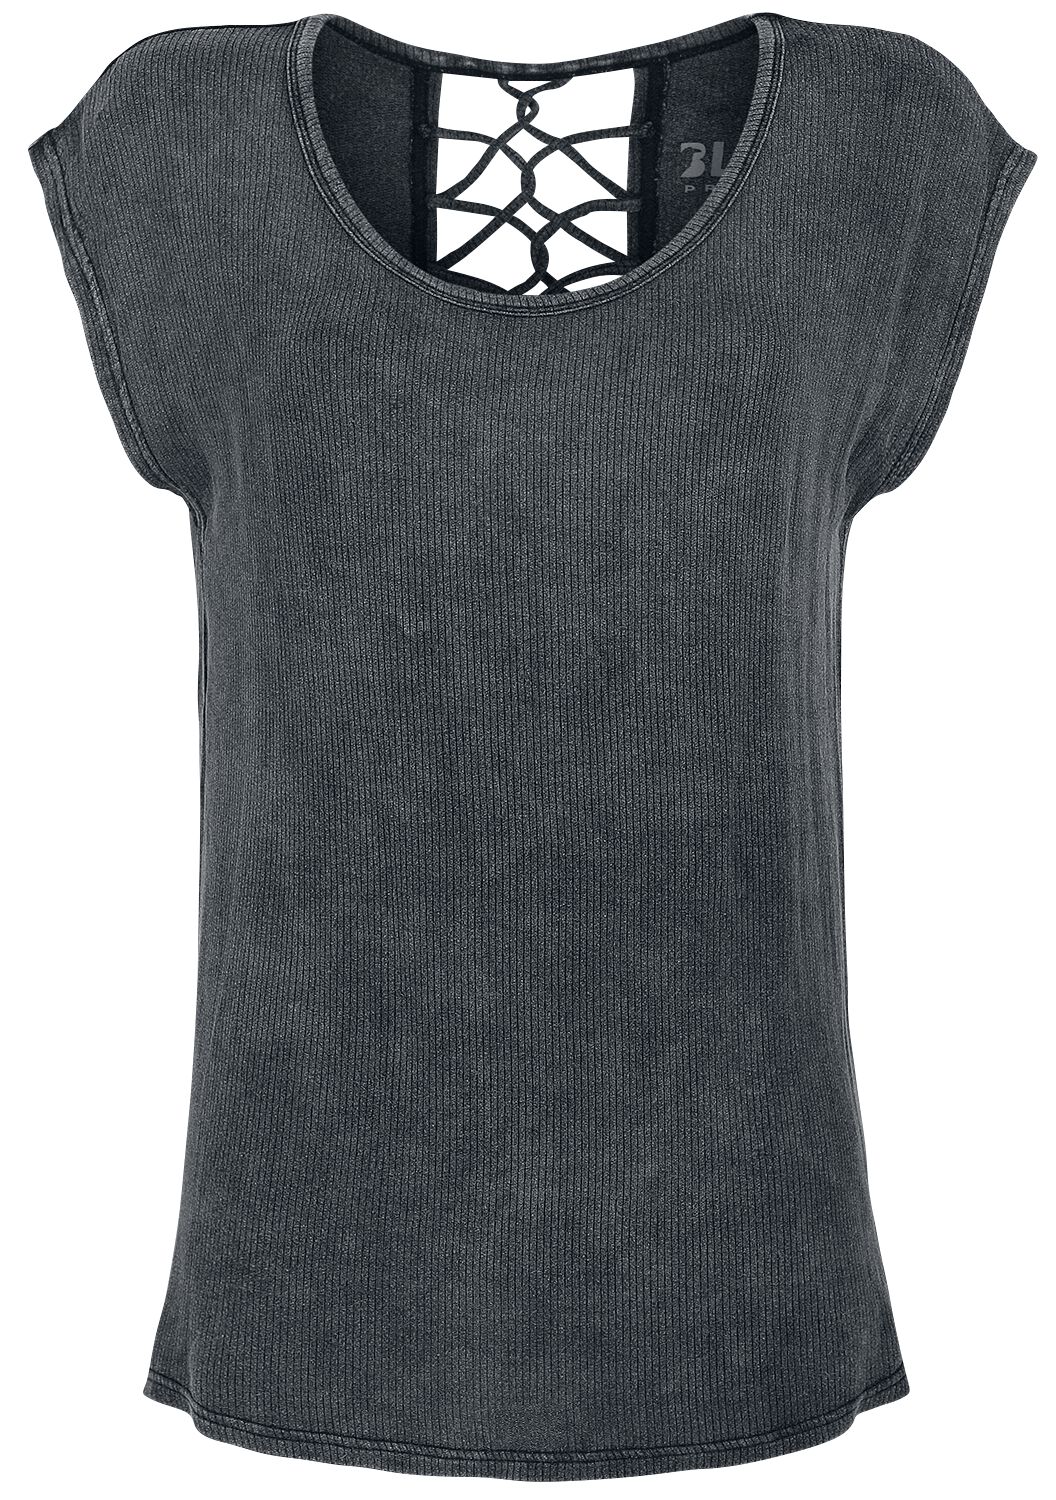 Image of T-Shirt di Black Premium by EMP - T-Shirt with Decorative Bands at the Back - XS a XXL - Donna - nero